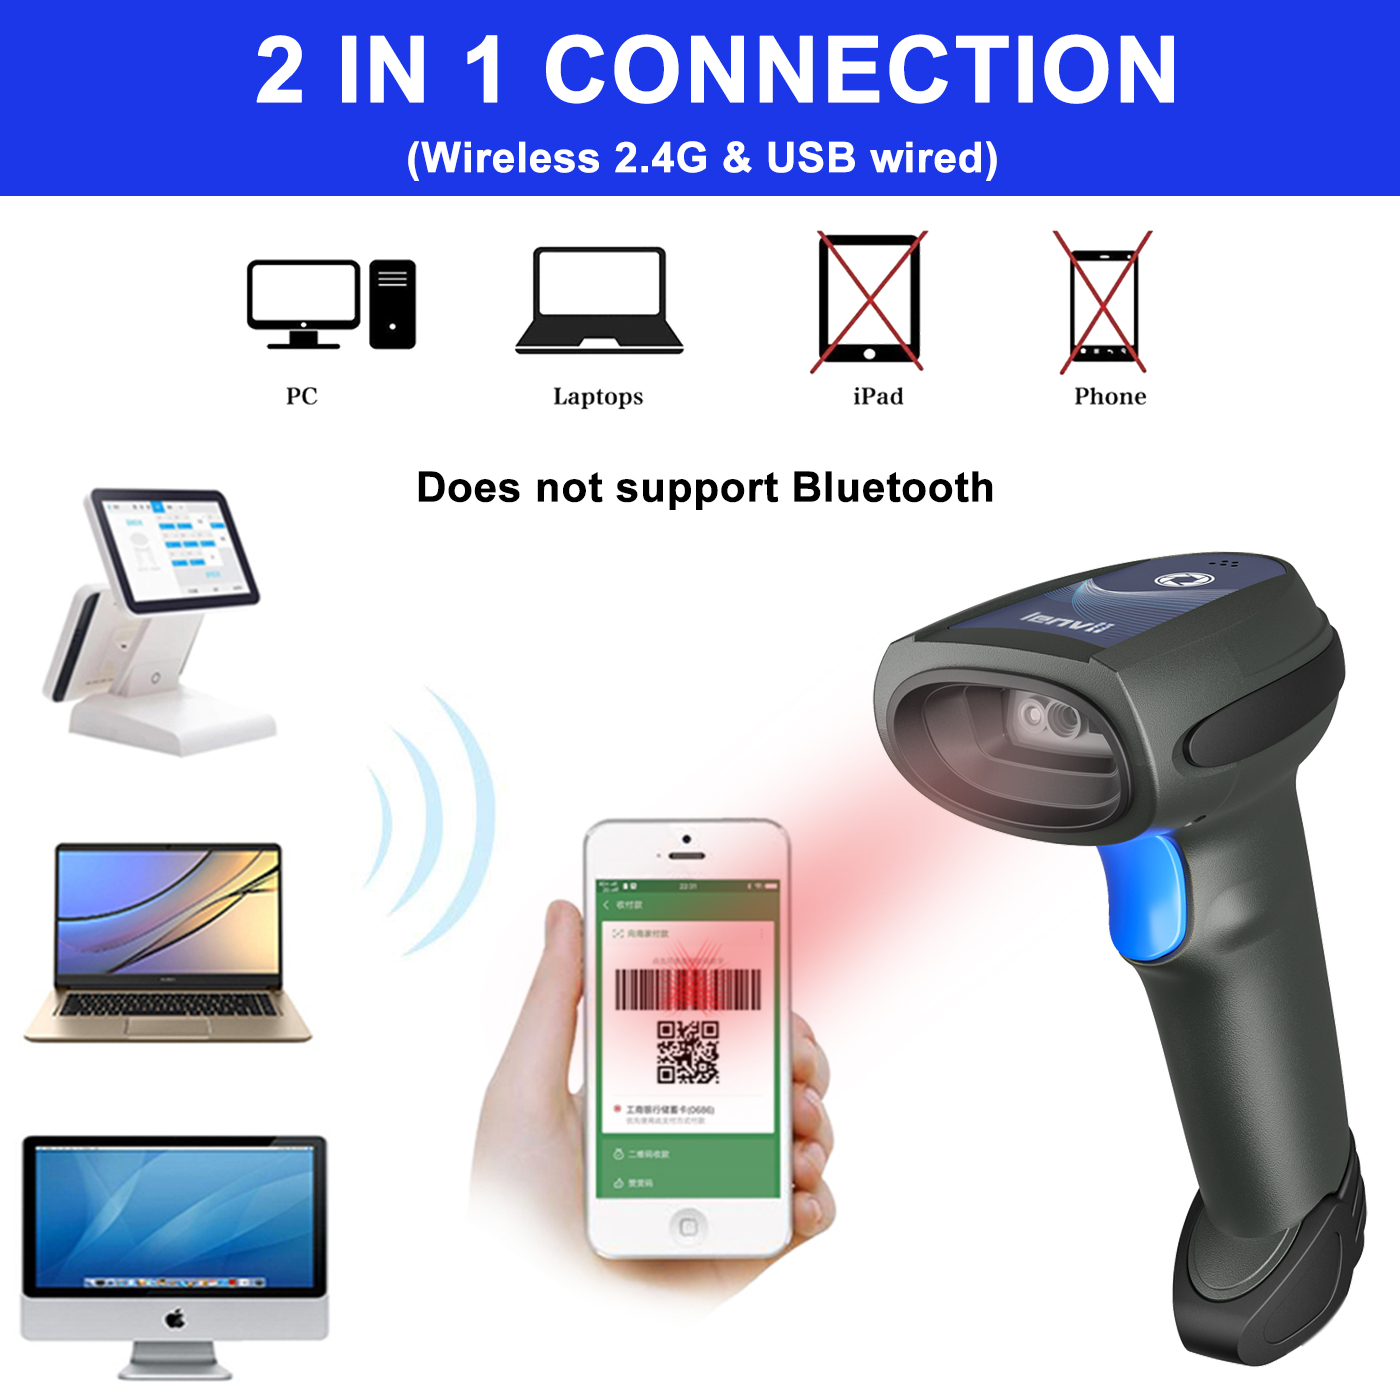 Wireless barcode scanner for check-in/check-out